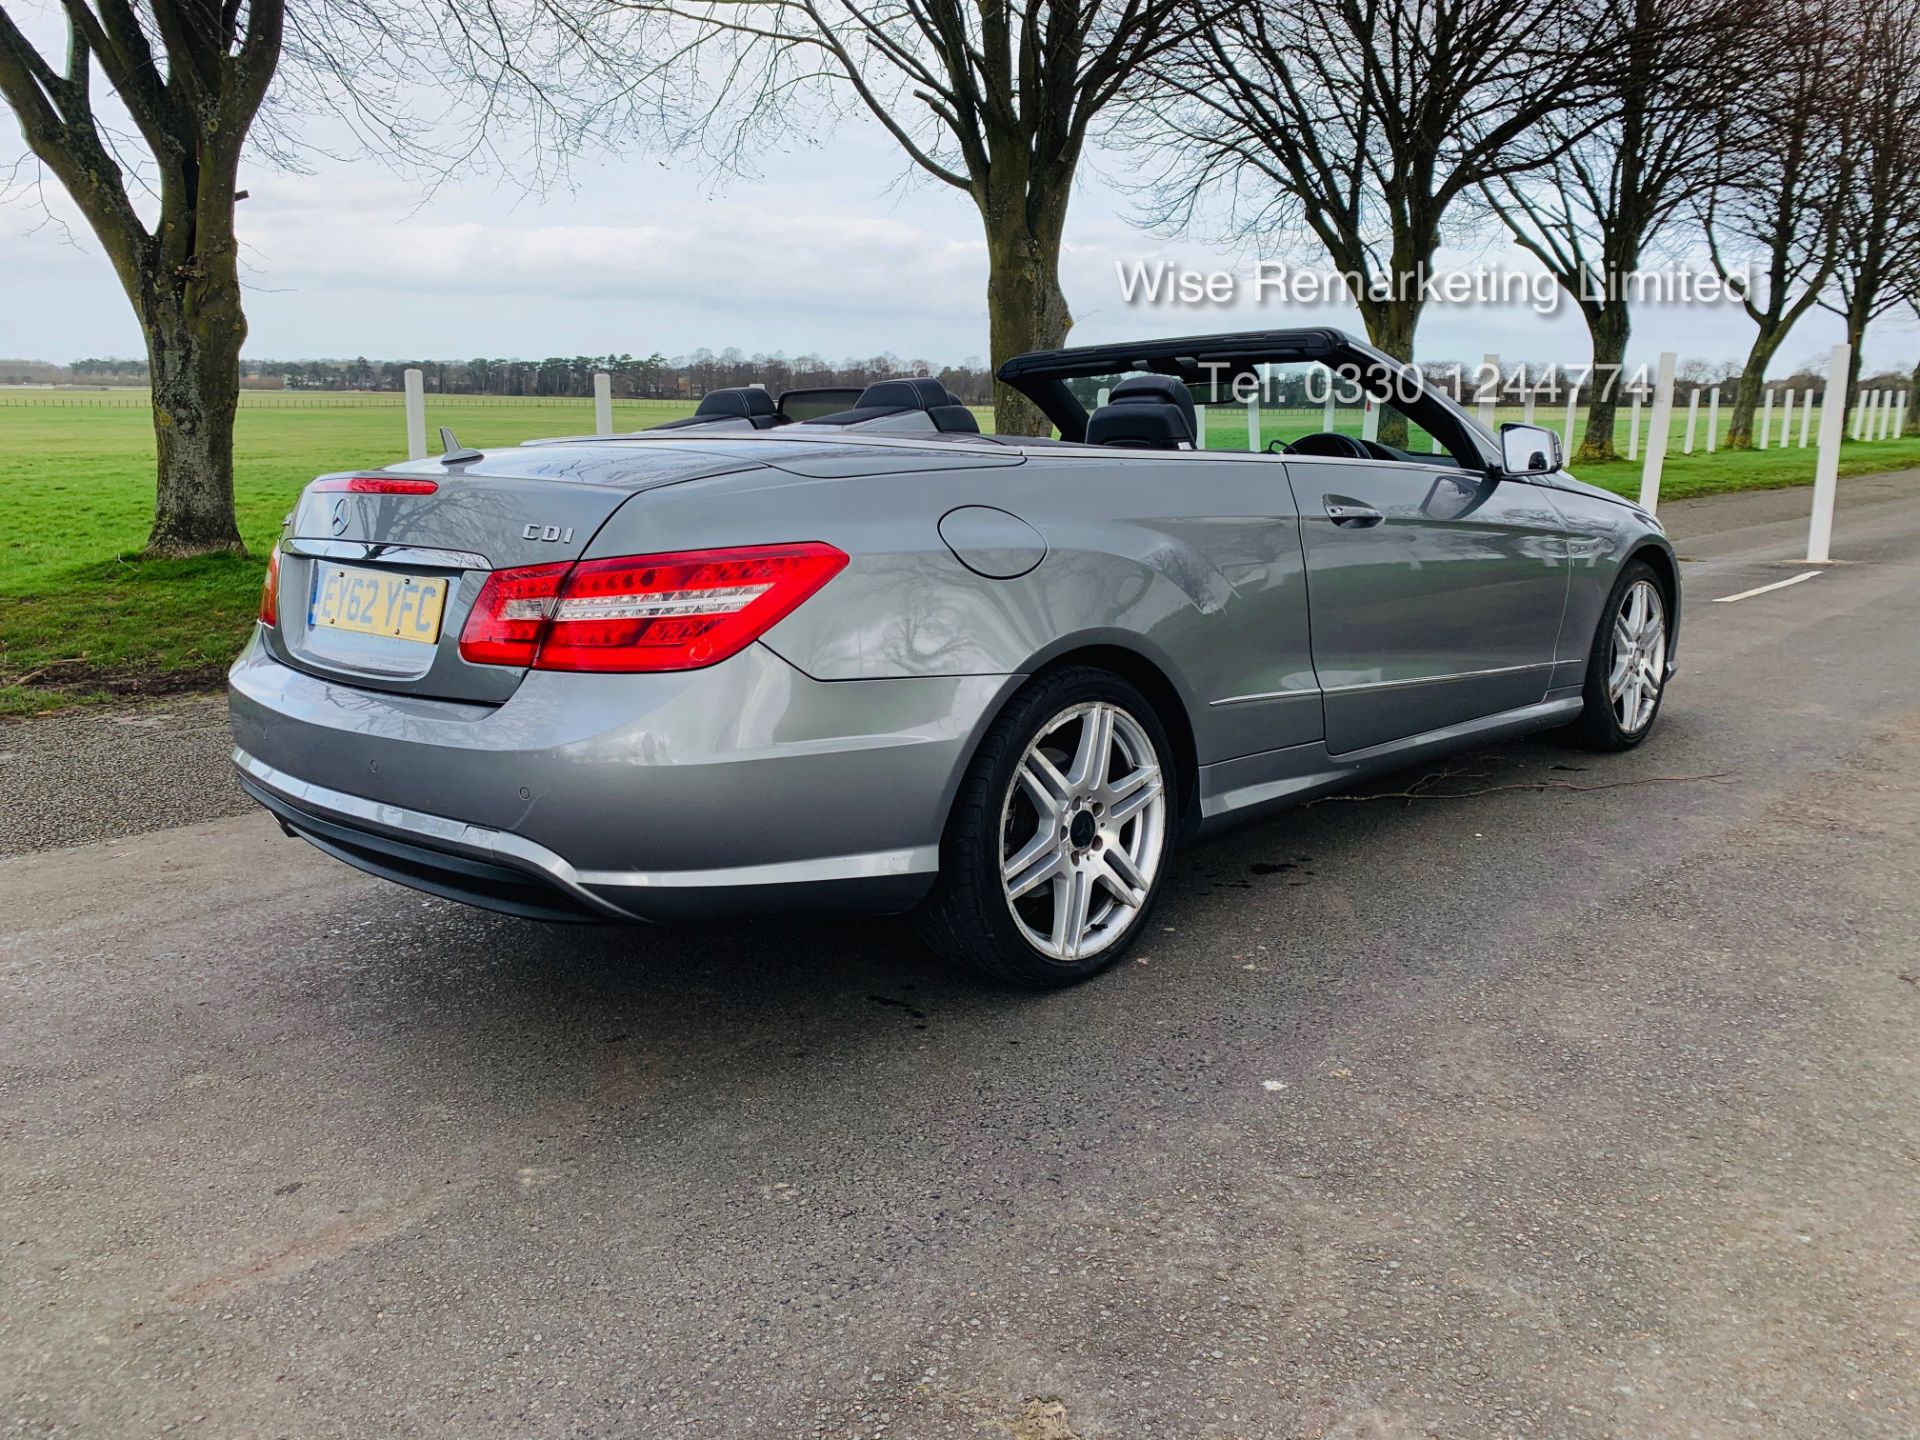 Mercedes E250 CDI Convertible Sport Tip Auto - 2013 Model - Service History - Leather - Parking aid - Image 12 of 27